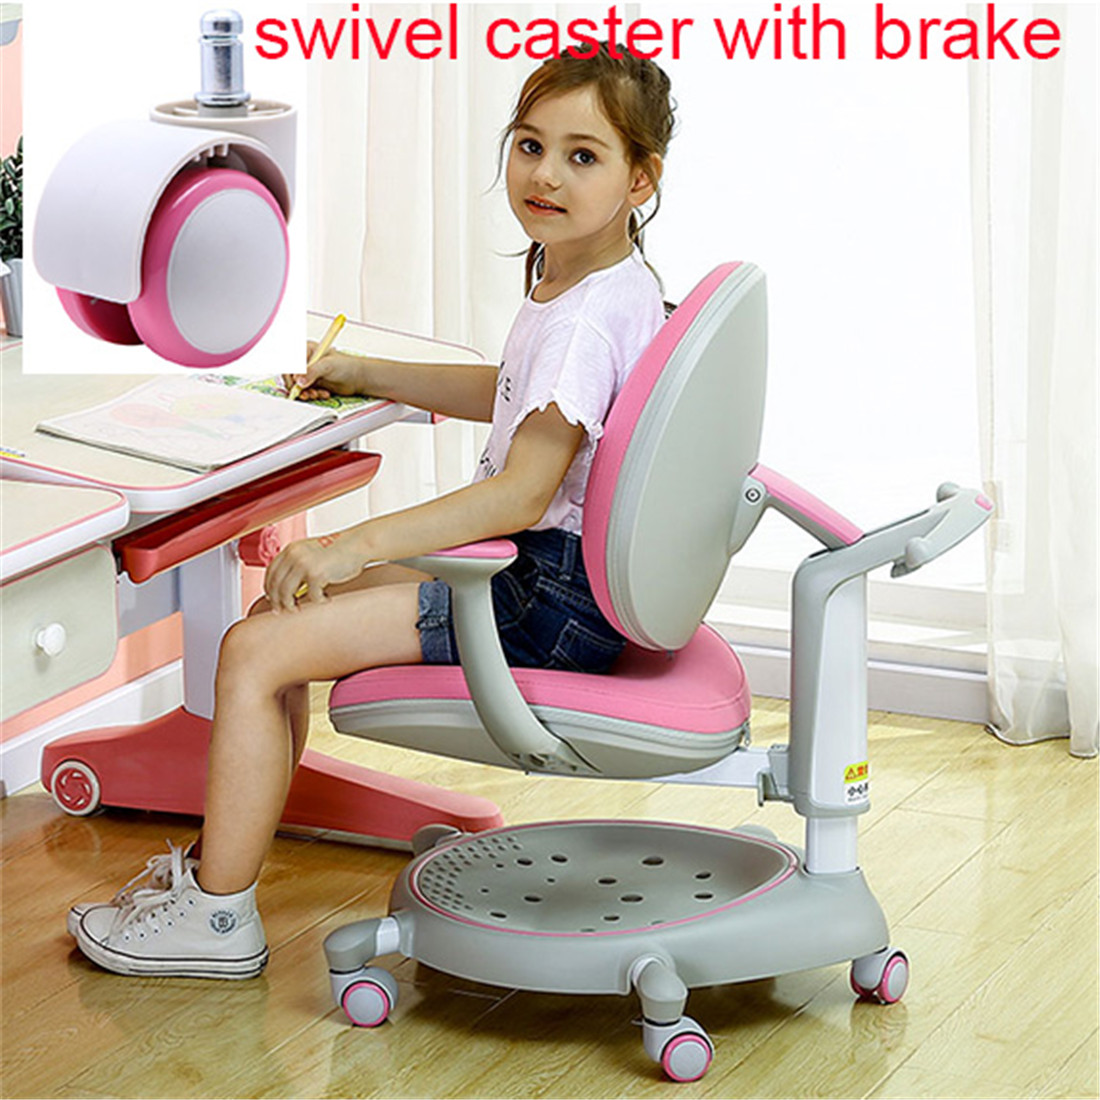 swivel caster with brake pink